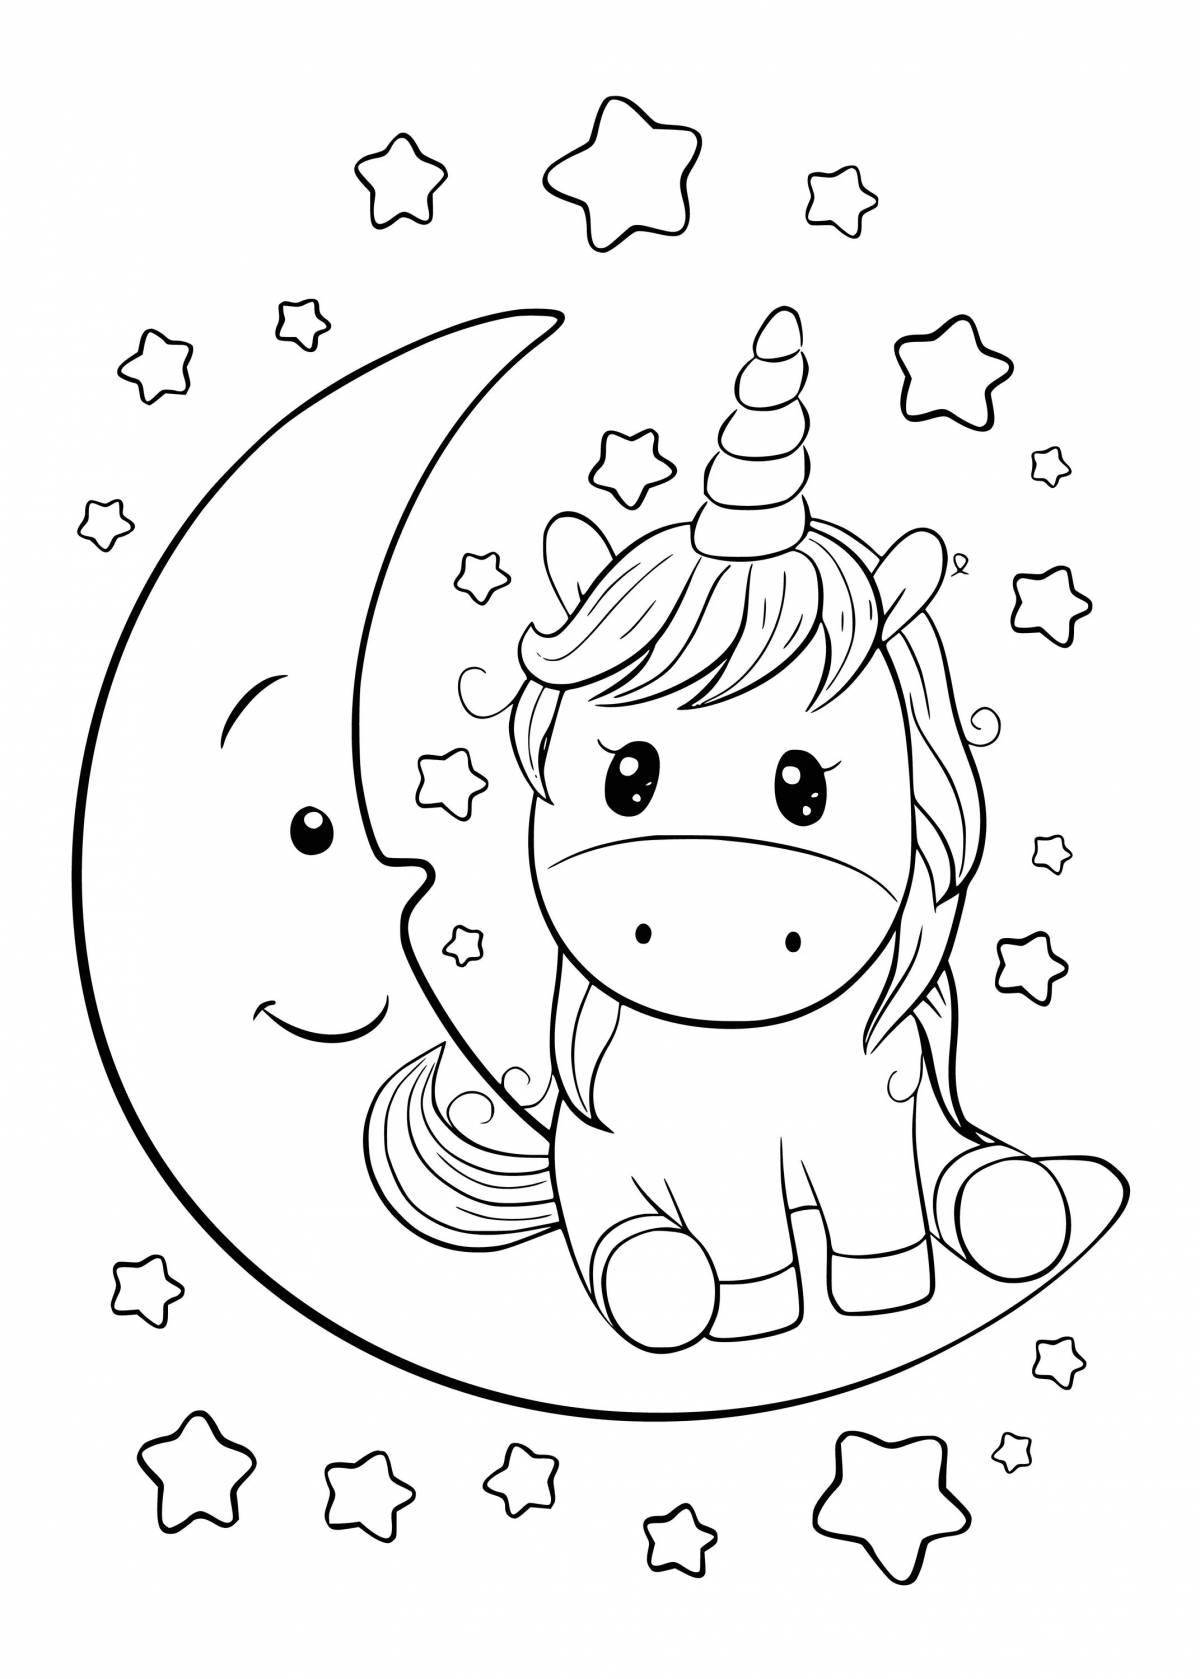 Awesome unicorn Christmas coloring book